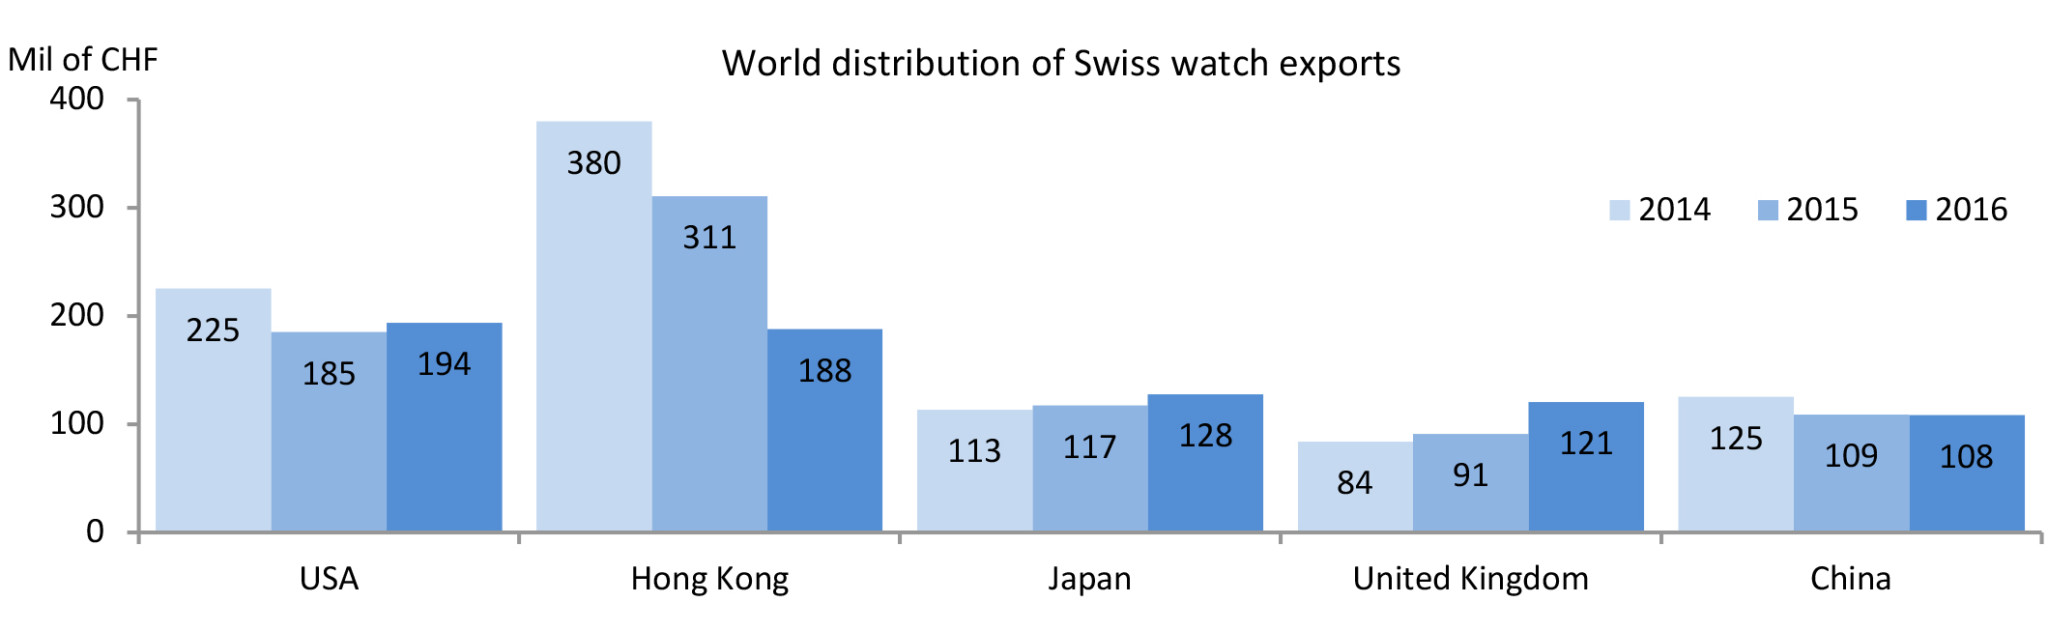 World distribution of swiss watch exports (sept 2016)